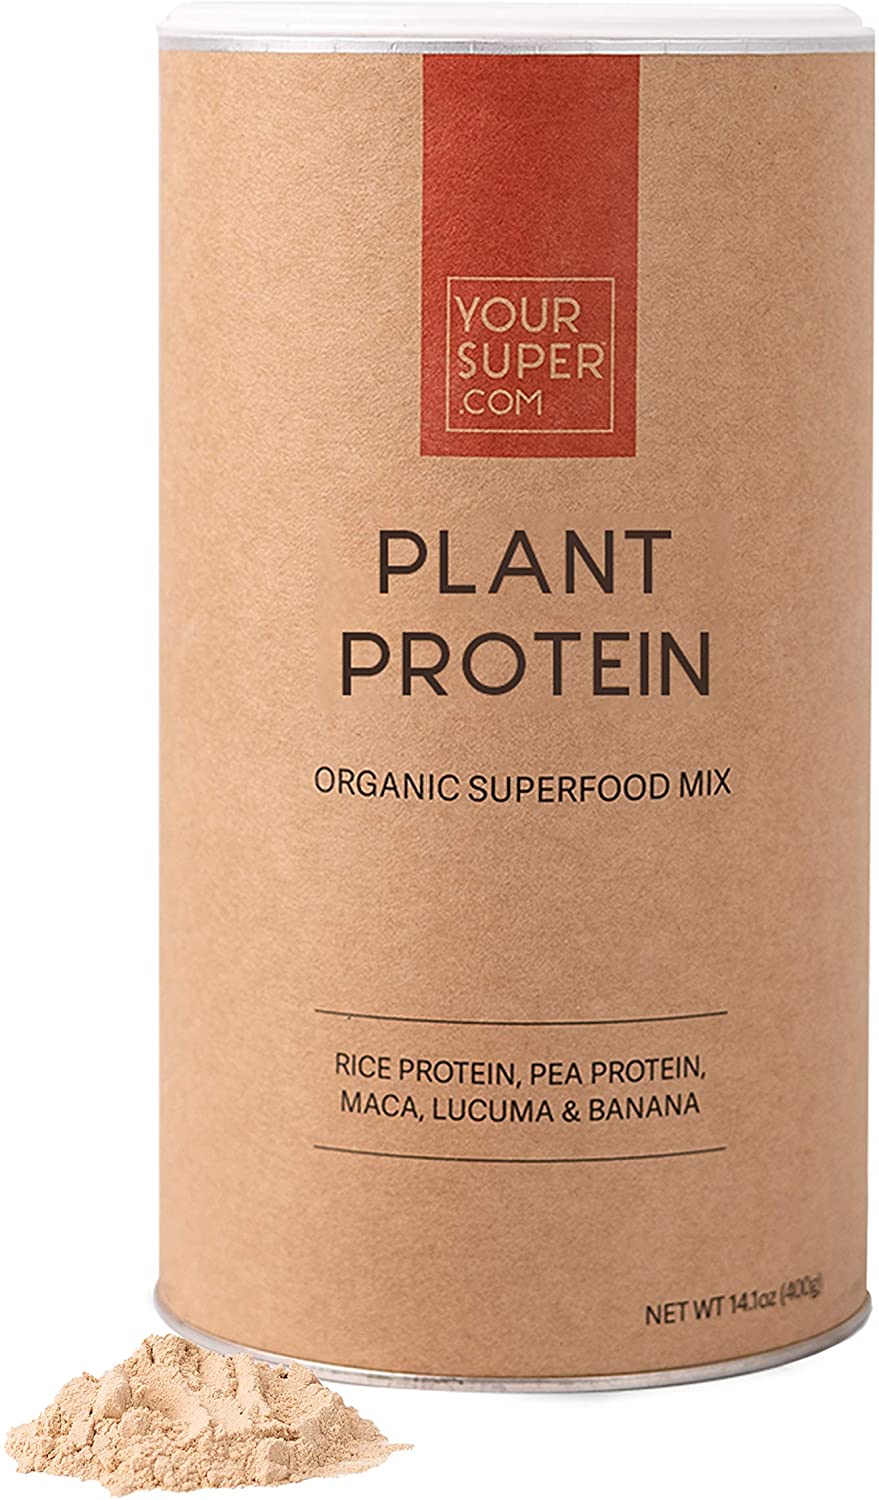 Your Super - Skinny Protein Organic Superfood Mix - 14.1 oz.